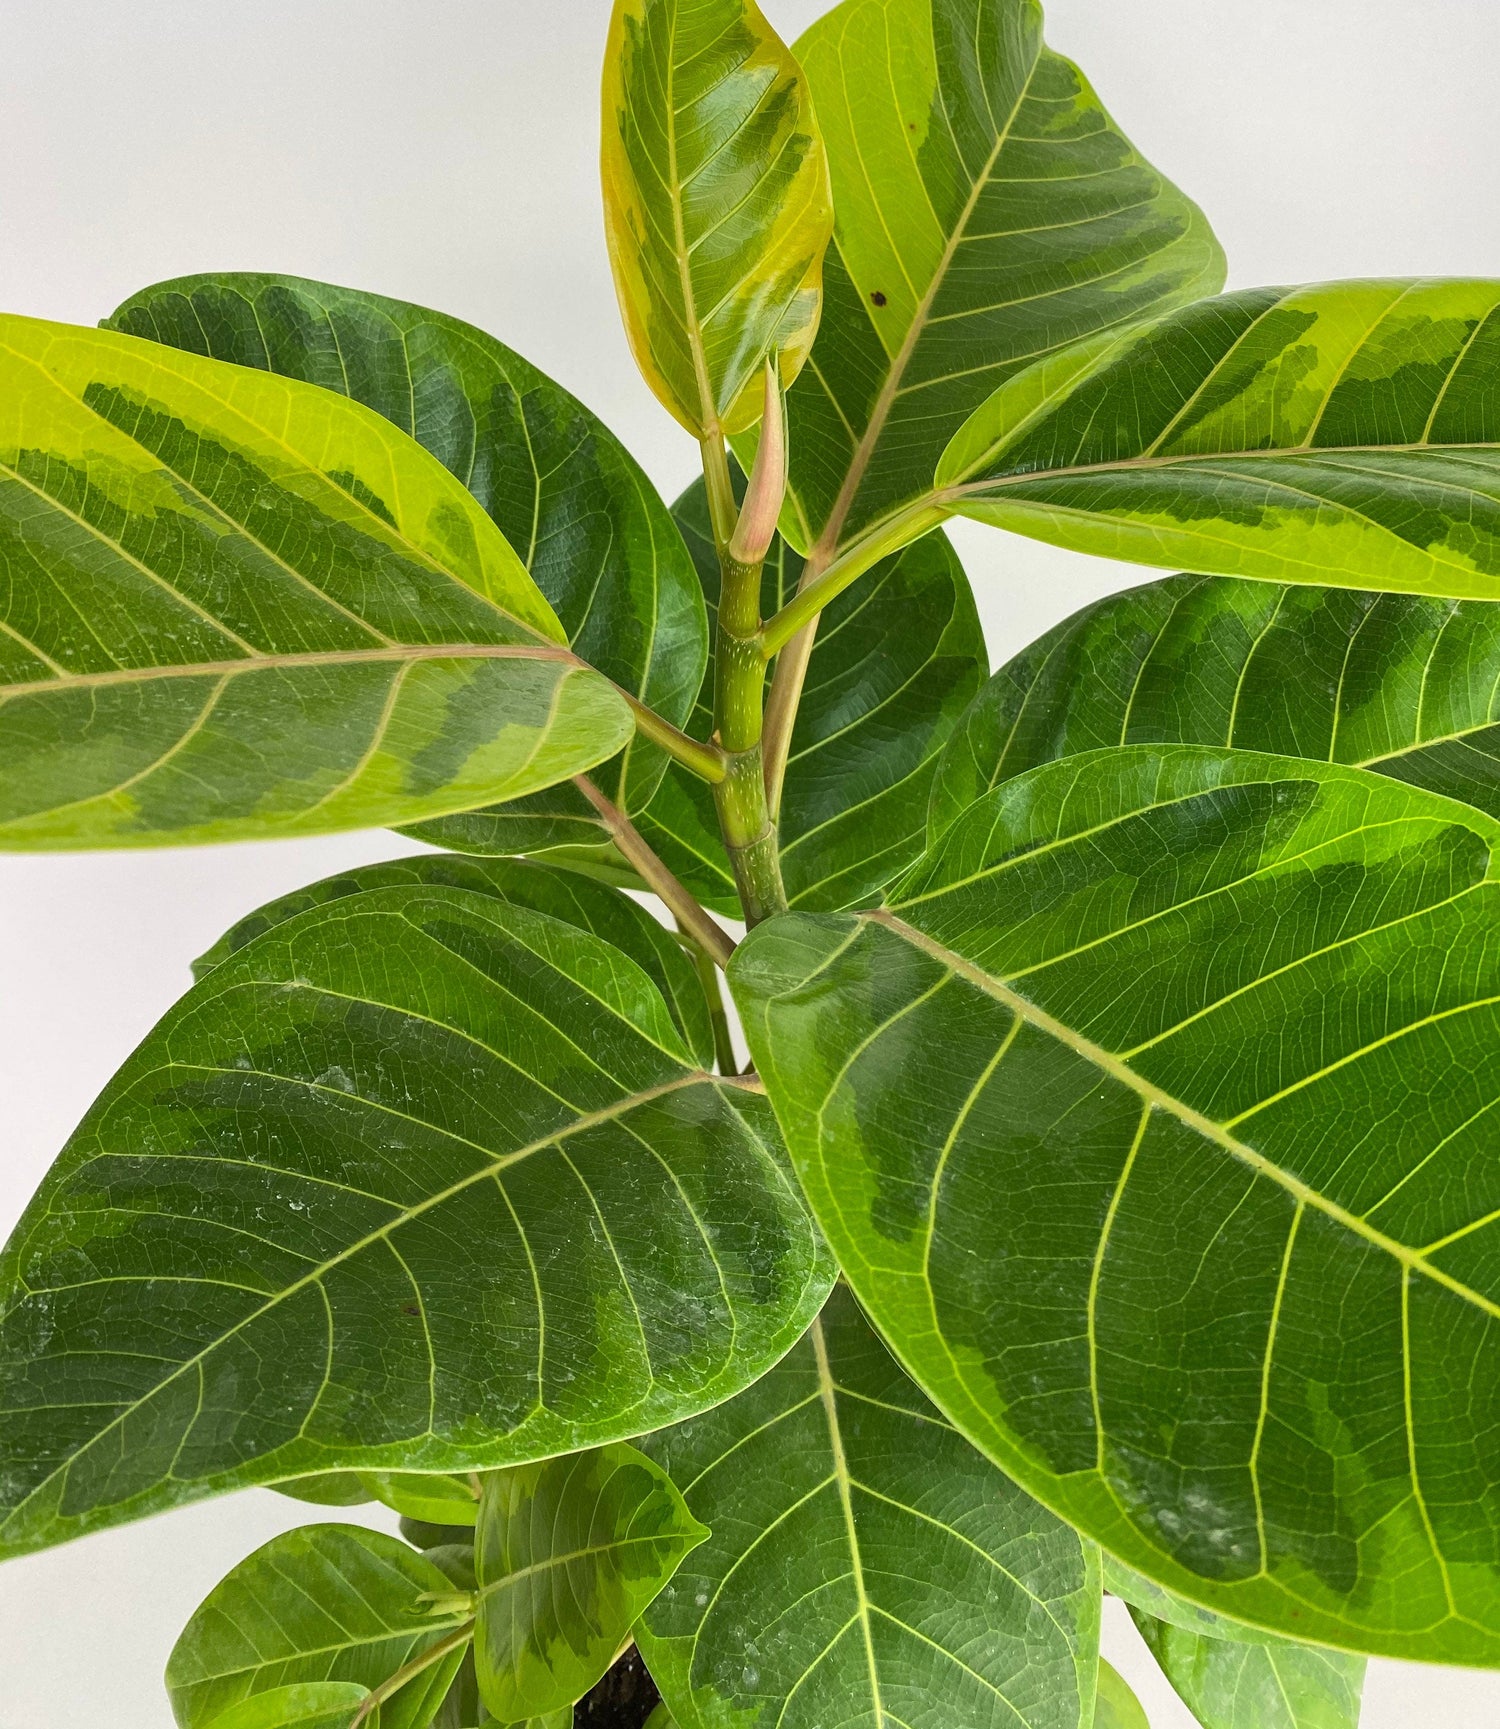 Braided Ficus Altissima Variegated Yellow Gem Rubber Tree